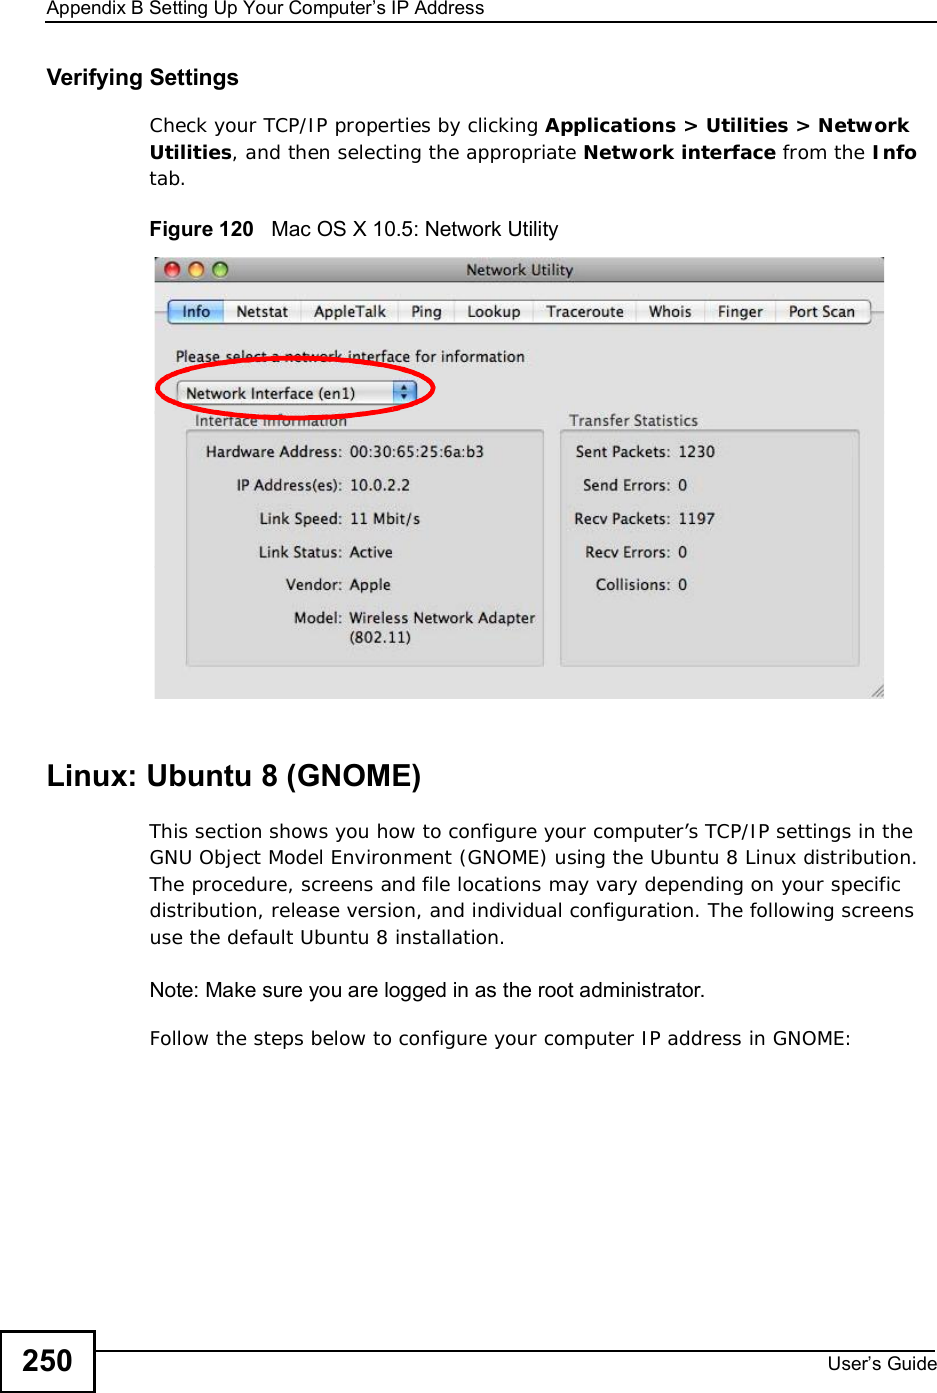 Appendix BSetting Up Your Computer s IP AddressUser s Guide250Verifying SettingsCheck your TCP/IP properties by clicking Applications &gt; Utilities &gt; Network Utilities, and then selecting the appropriate Network interface from the Infotab.Figure 120   Mac OS X 10.5: Network UtilityLinux: Ubuntu 8 (GNOME)This section shows you how to configure your computer’s TCP/IP settings in the GNU Object Model Environment (GNOME) using the Ubuntu 8 Linux distribution. The procedure, screens and file locations may vary depending on your specific distribution, release version, and individual configuration. The following screens use the default Ubuntu 8 installation.Note: Make sure you are logged in as the root administrator. Follow the steps below to configure your computer IP address in GNOME: 